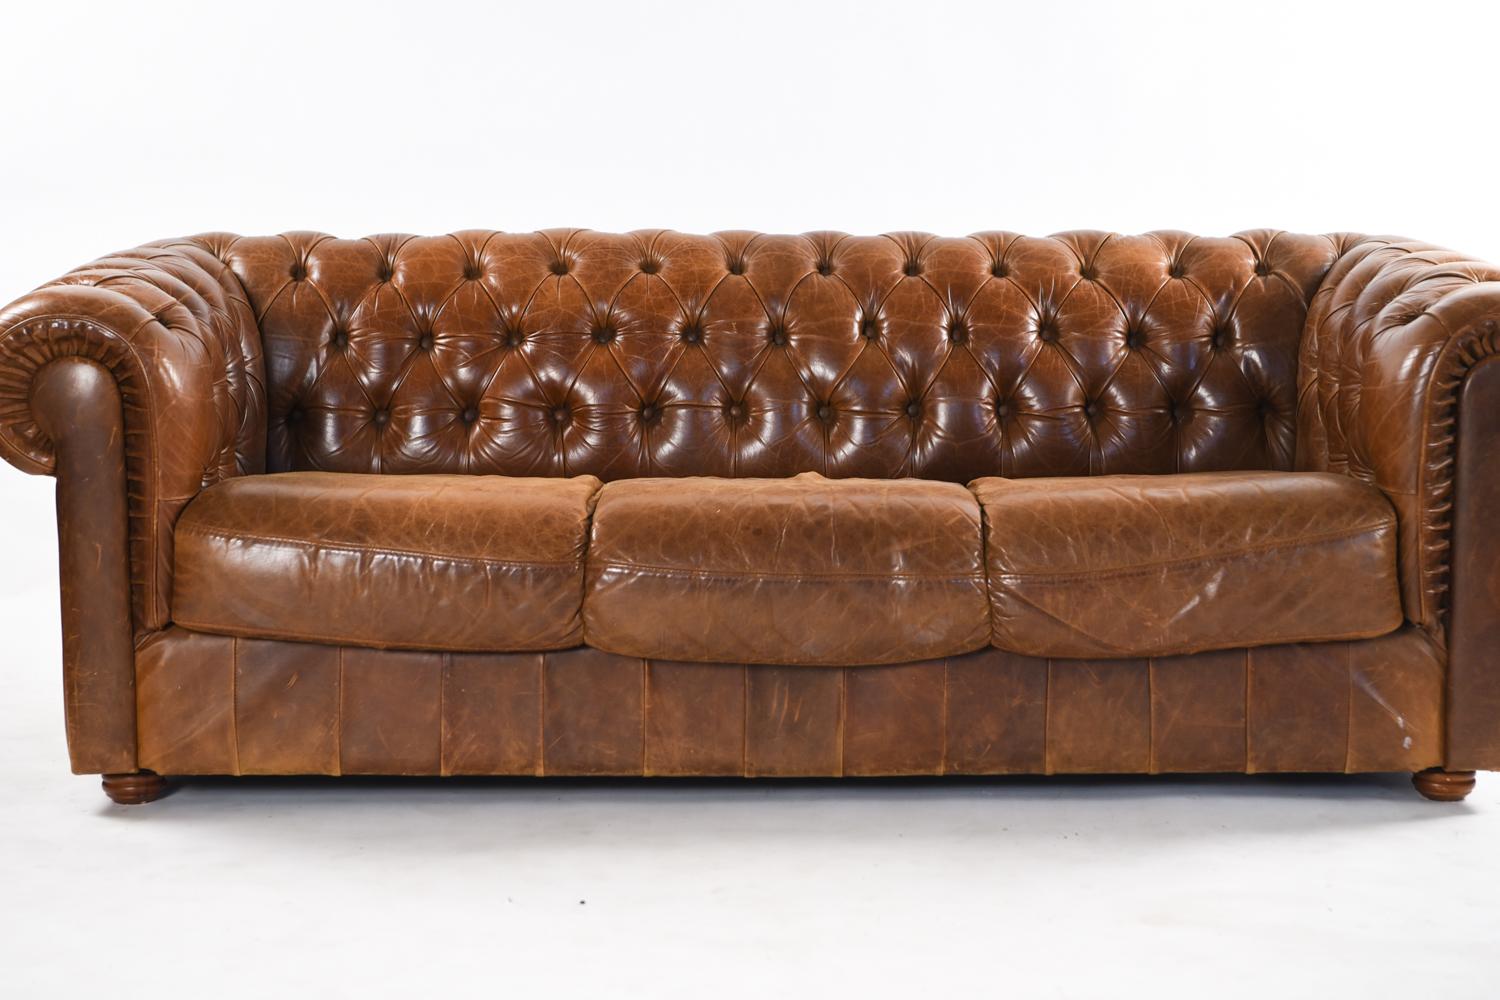 This three-seat vintage English Chesterfield sofa has a beautiful, original patination to the leather. With the traditional tufted surface and scrolling arms, this is a timeless piece that only gains style and comfort with age.